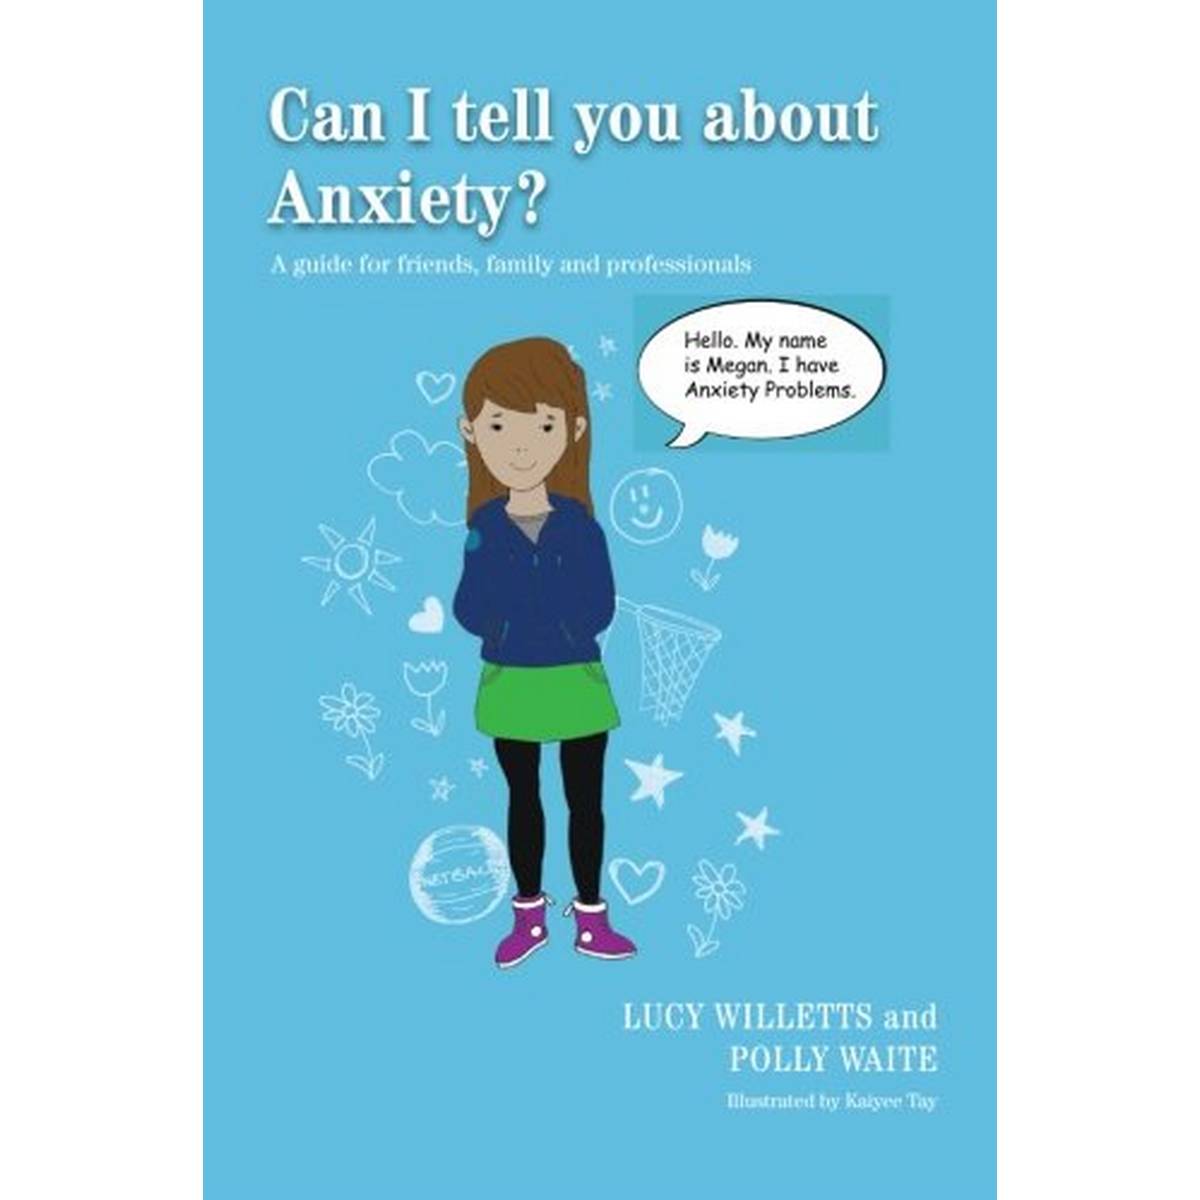 Can I tell you about Anxiety?